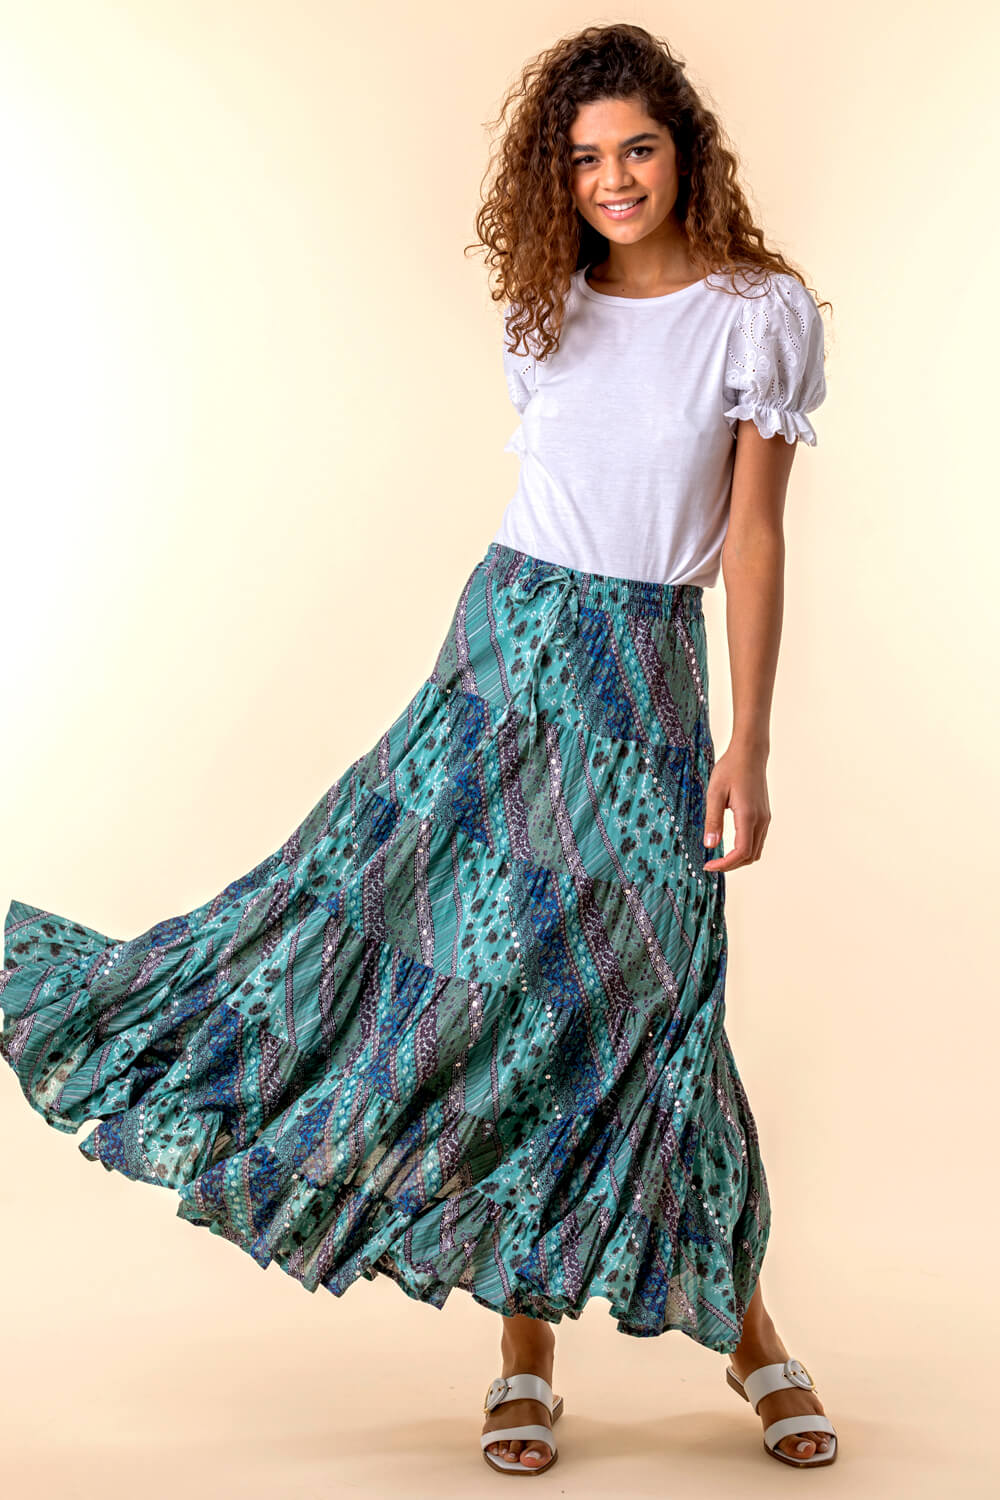 Turquoise Paisley Print Sequin Embellished Skirt, Image 4 of 4